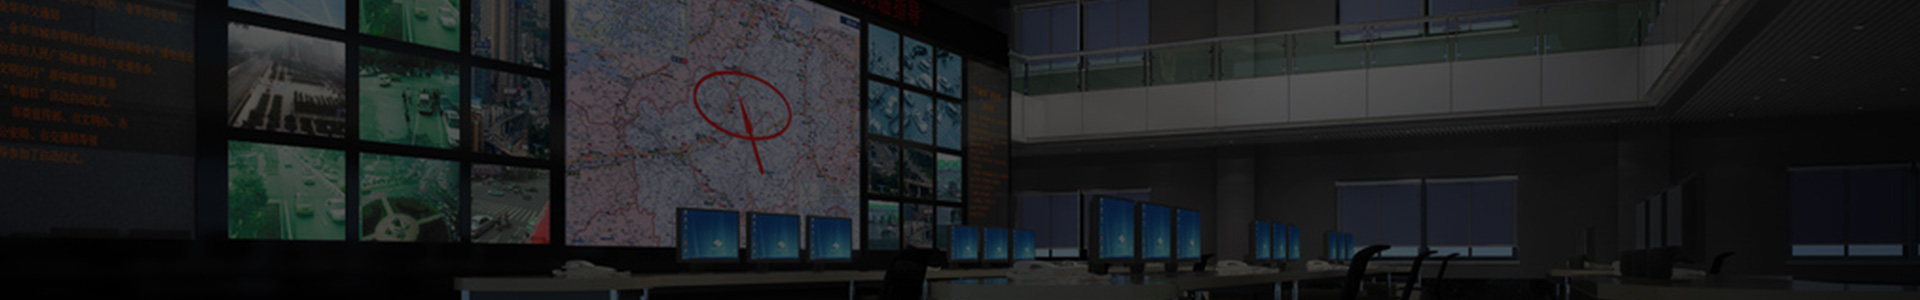 Public Safety Synthetic Operations Center